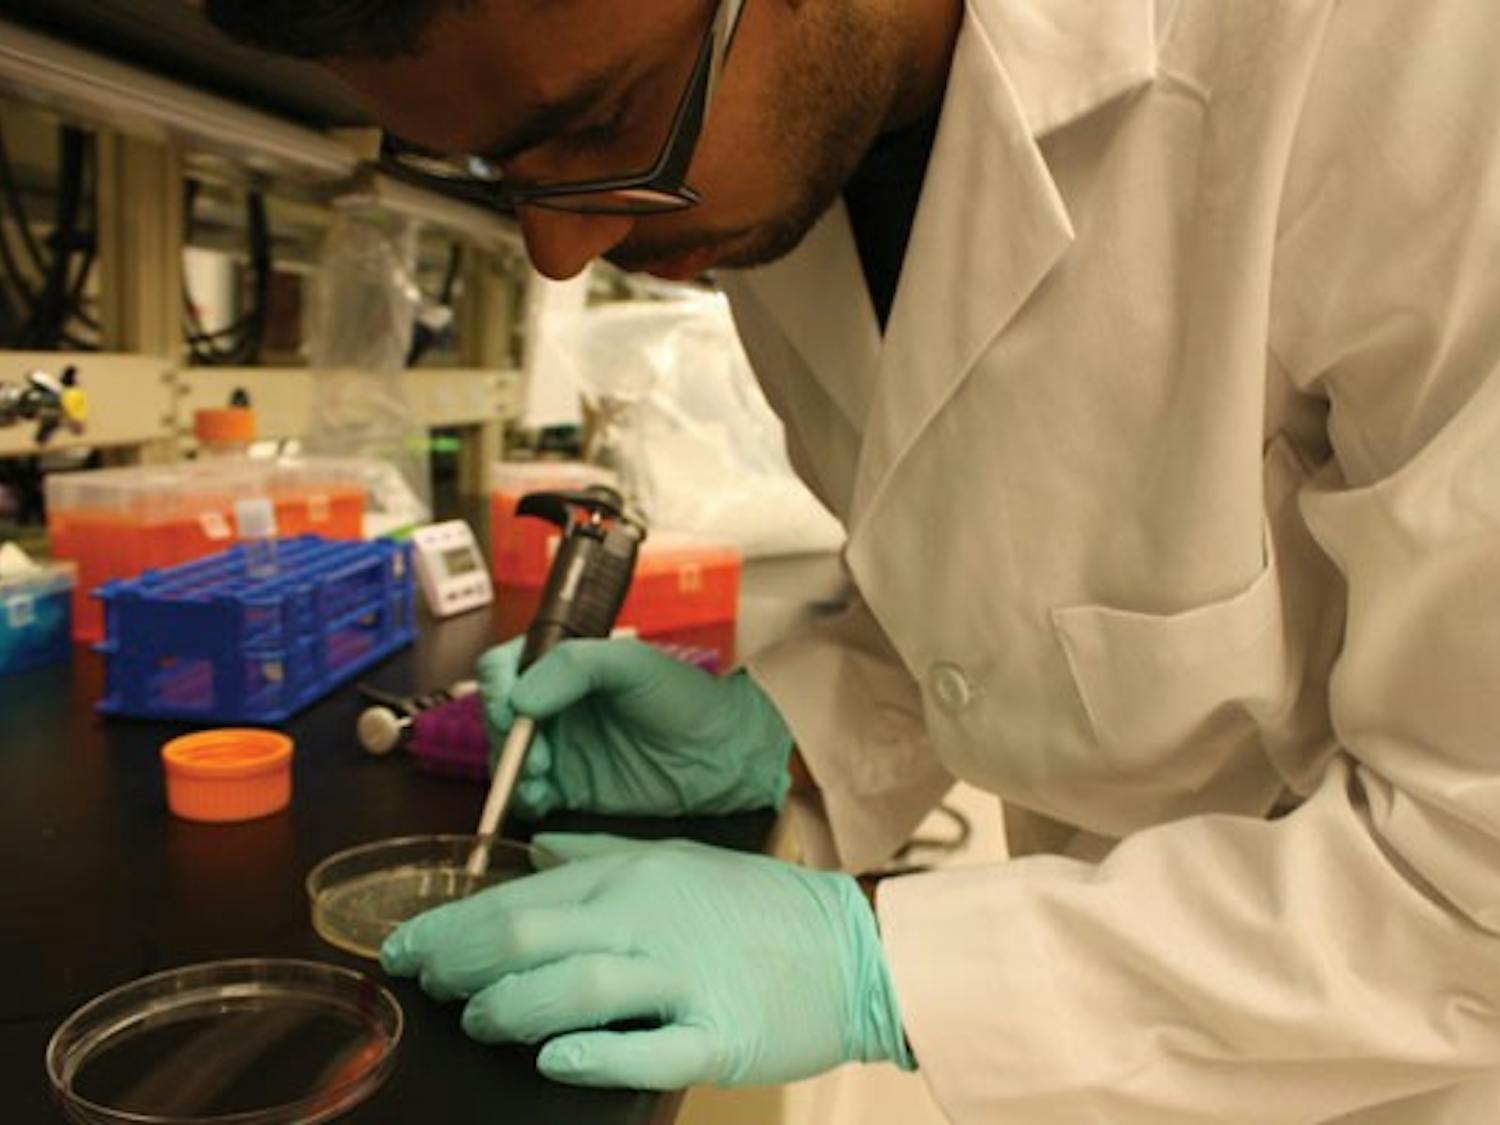 Biomedical Engineer junior Abhinav Markus works with a pipette tool to isolate a single colony from the bacteria plate. (Photo by Jessie Wardarski)